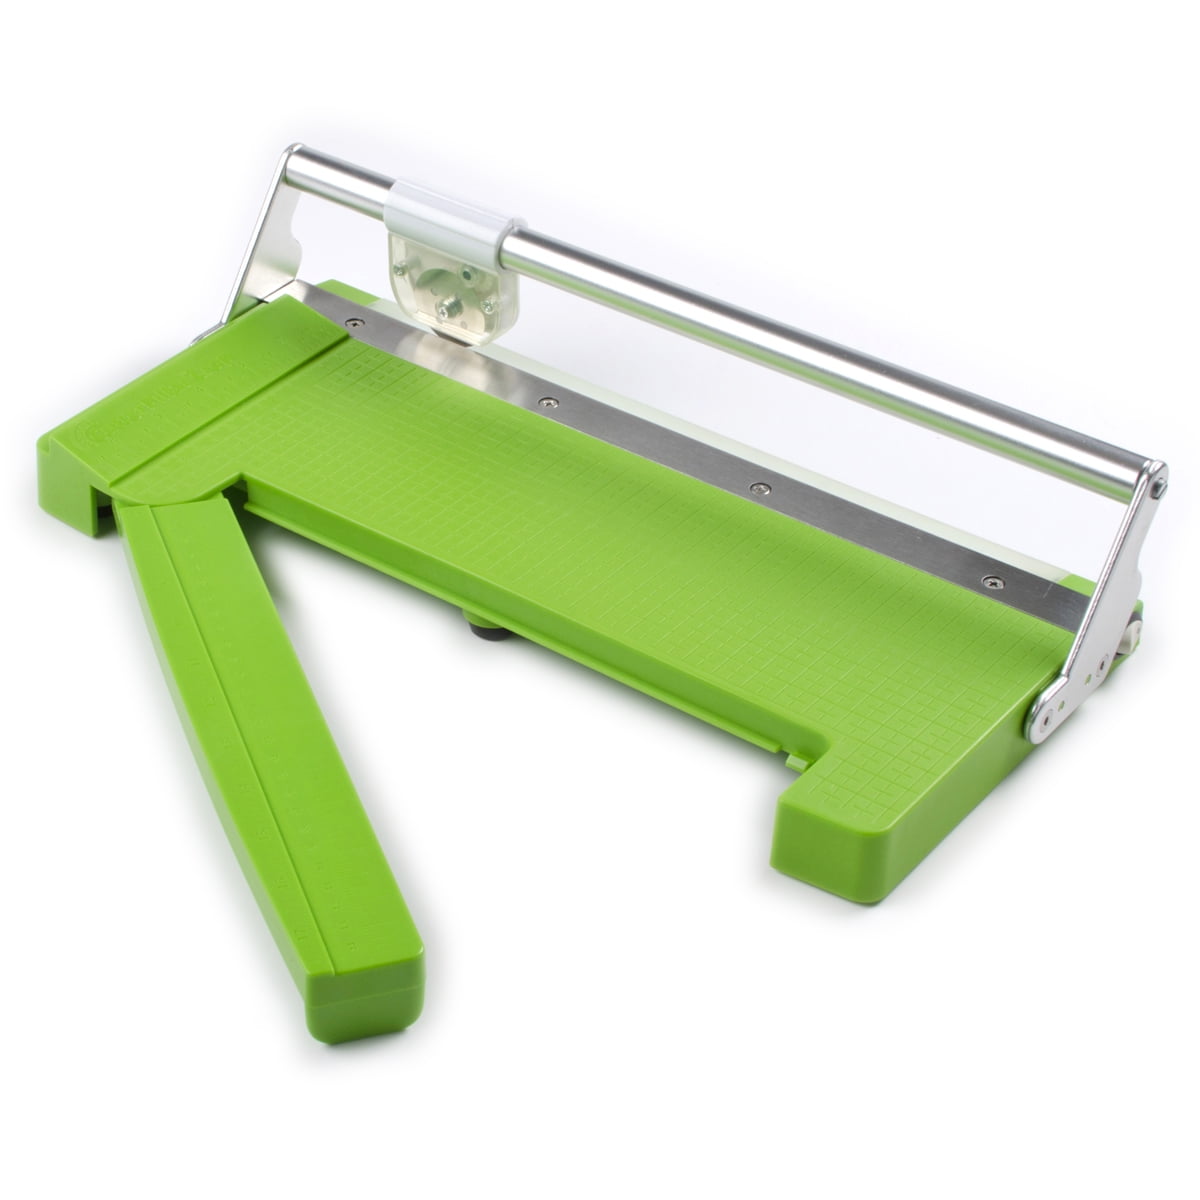 CUTTERPILLAR CROP: Portable Model for Perfect Paper Trimmer Cutter Cuts  Every Time